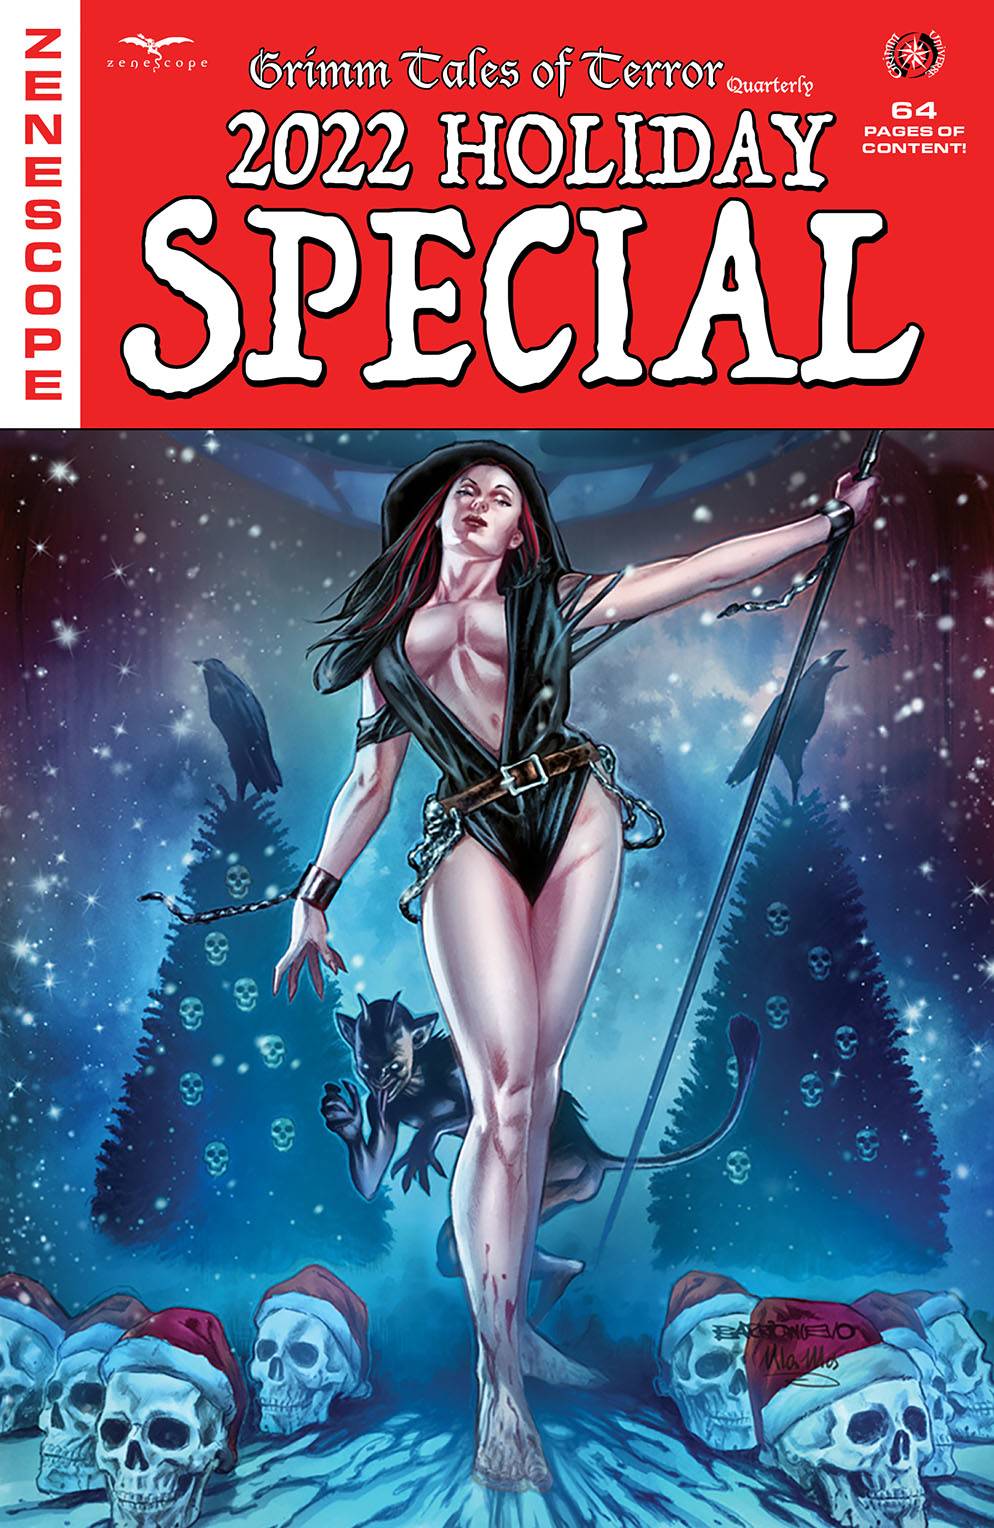 The One Stop Shop Comics & Games Tales Of Terror Quarterly 2022 Holiday Special Cvr A Barrion (12/14/2022) ZENESCOPE ENTERTAINMENT INC